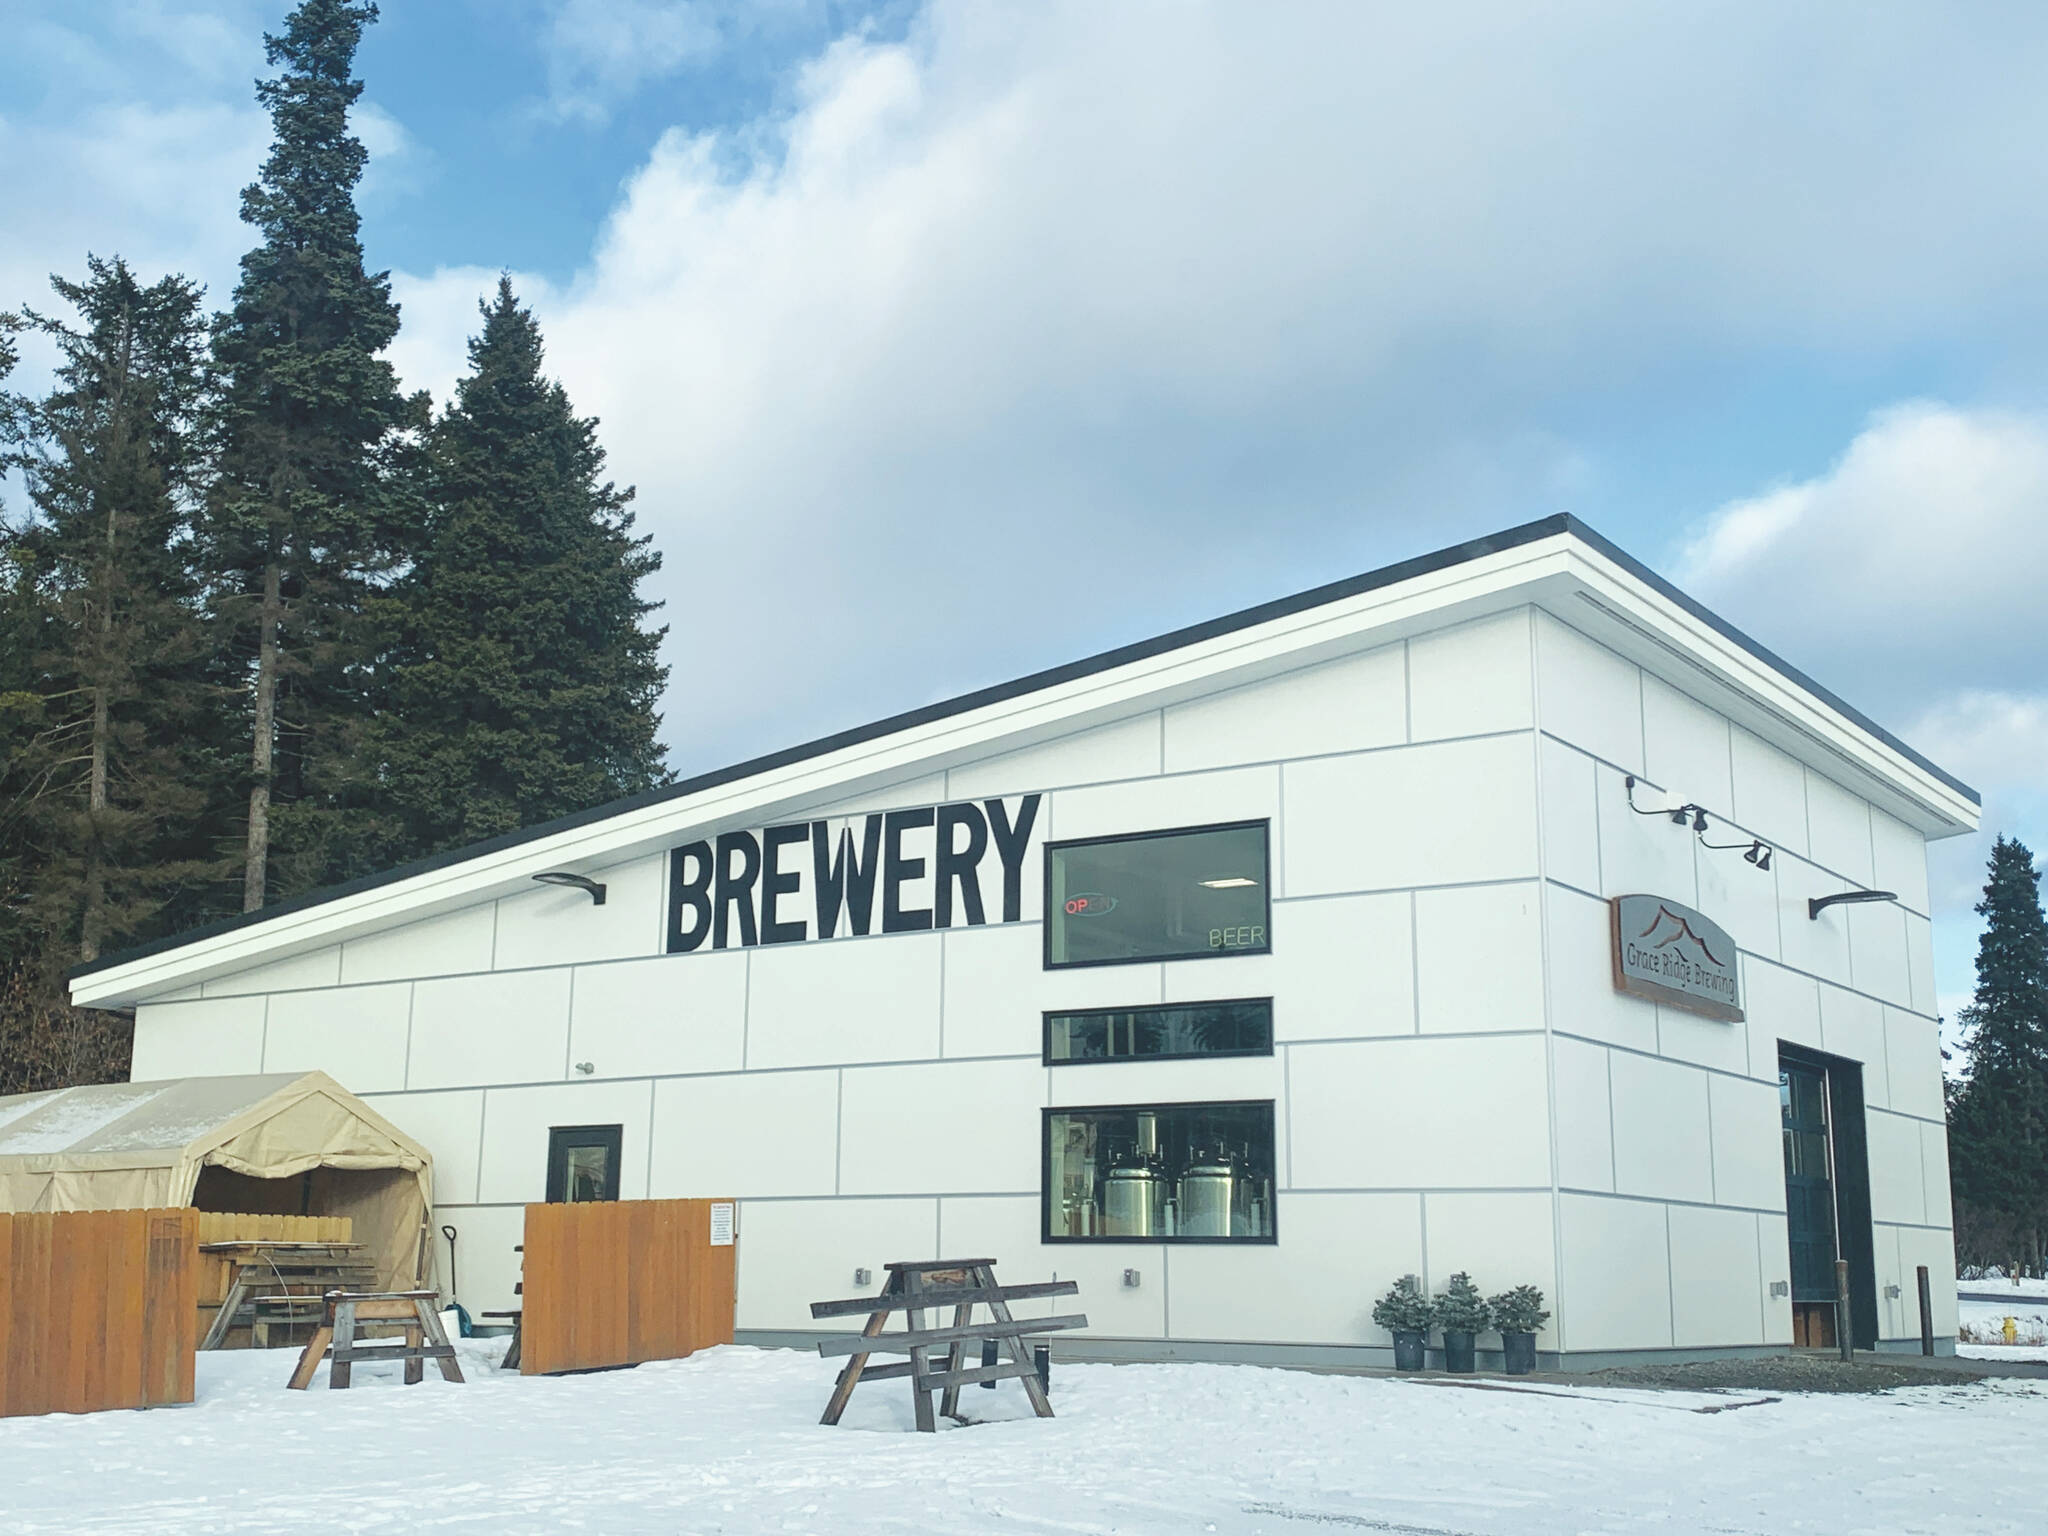 Photo by Christina Whiting/Homer News
Grace Ridge Brewery celebrates one year in their new building on Smoky Bay Way, photographed Friday.